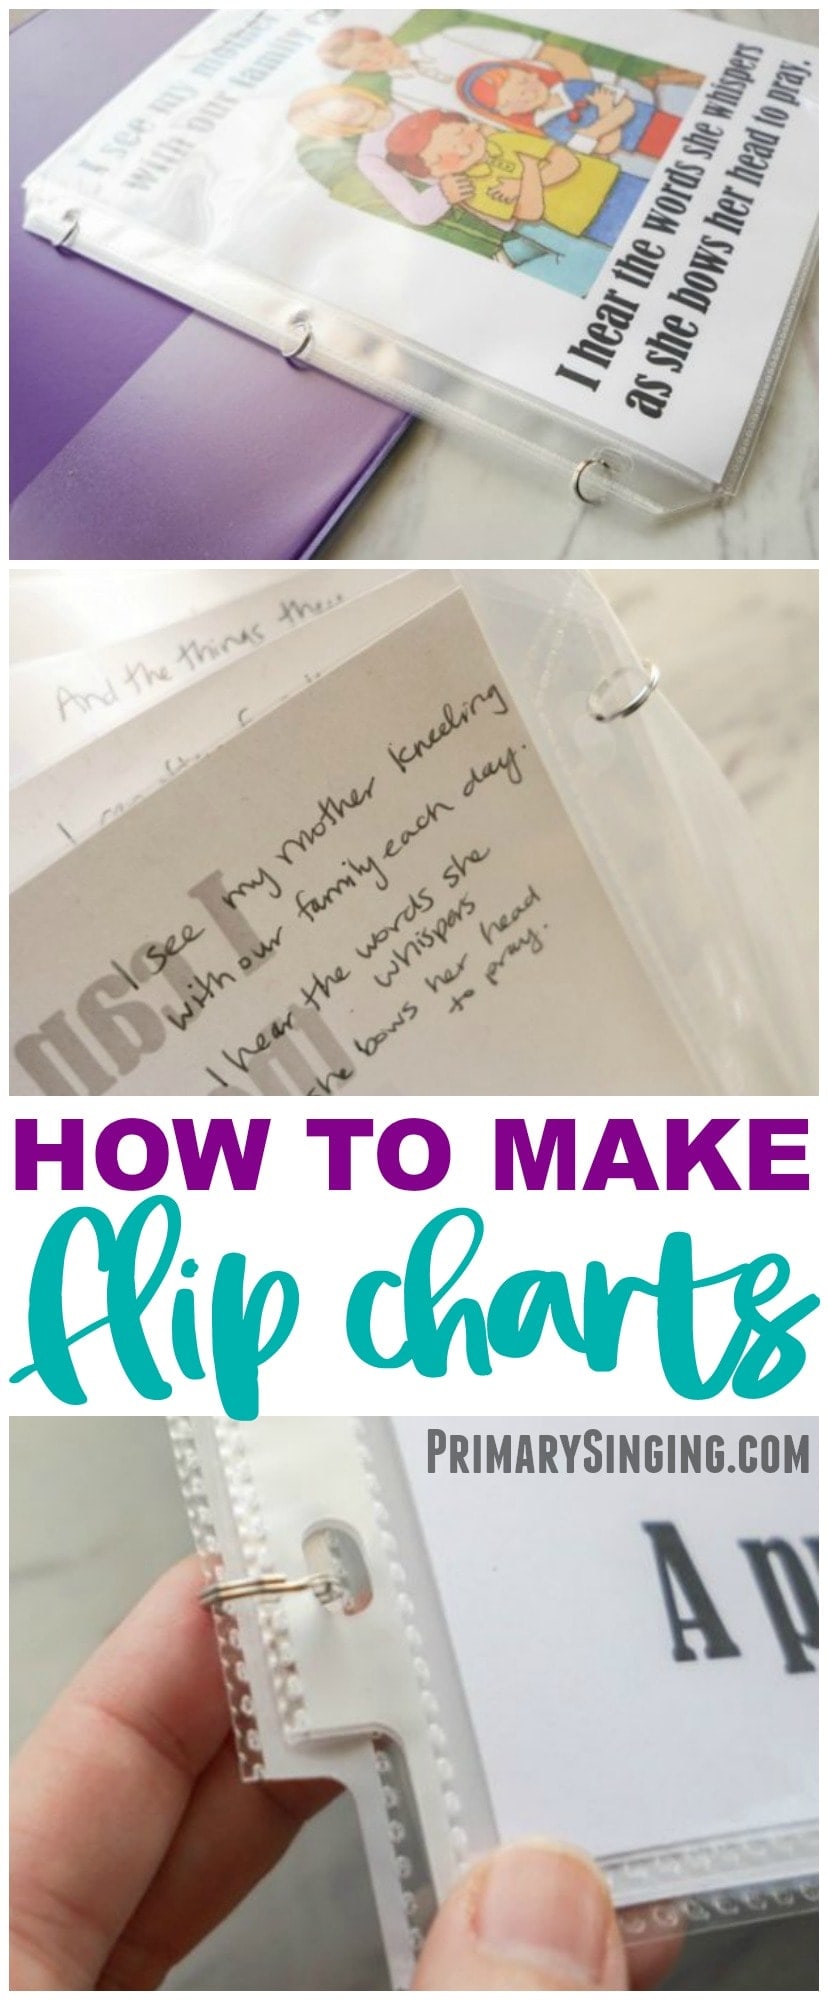 How to Make & Use Flip Charts - Primary Singing